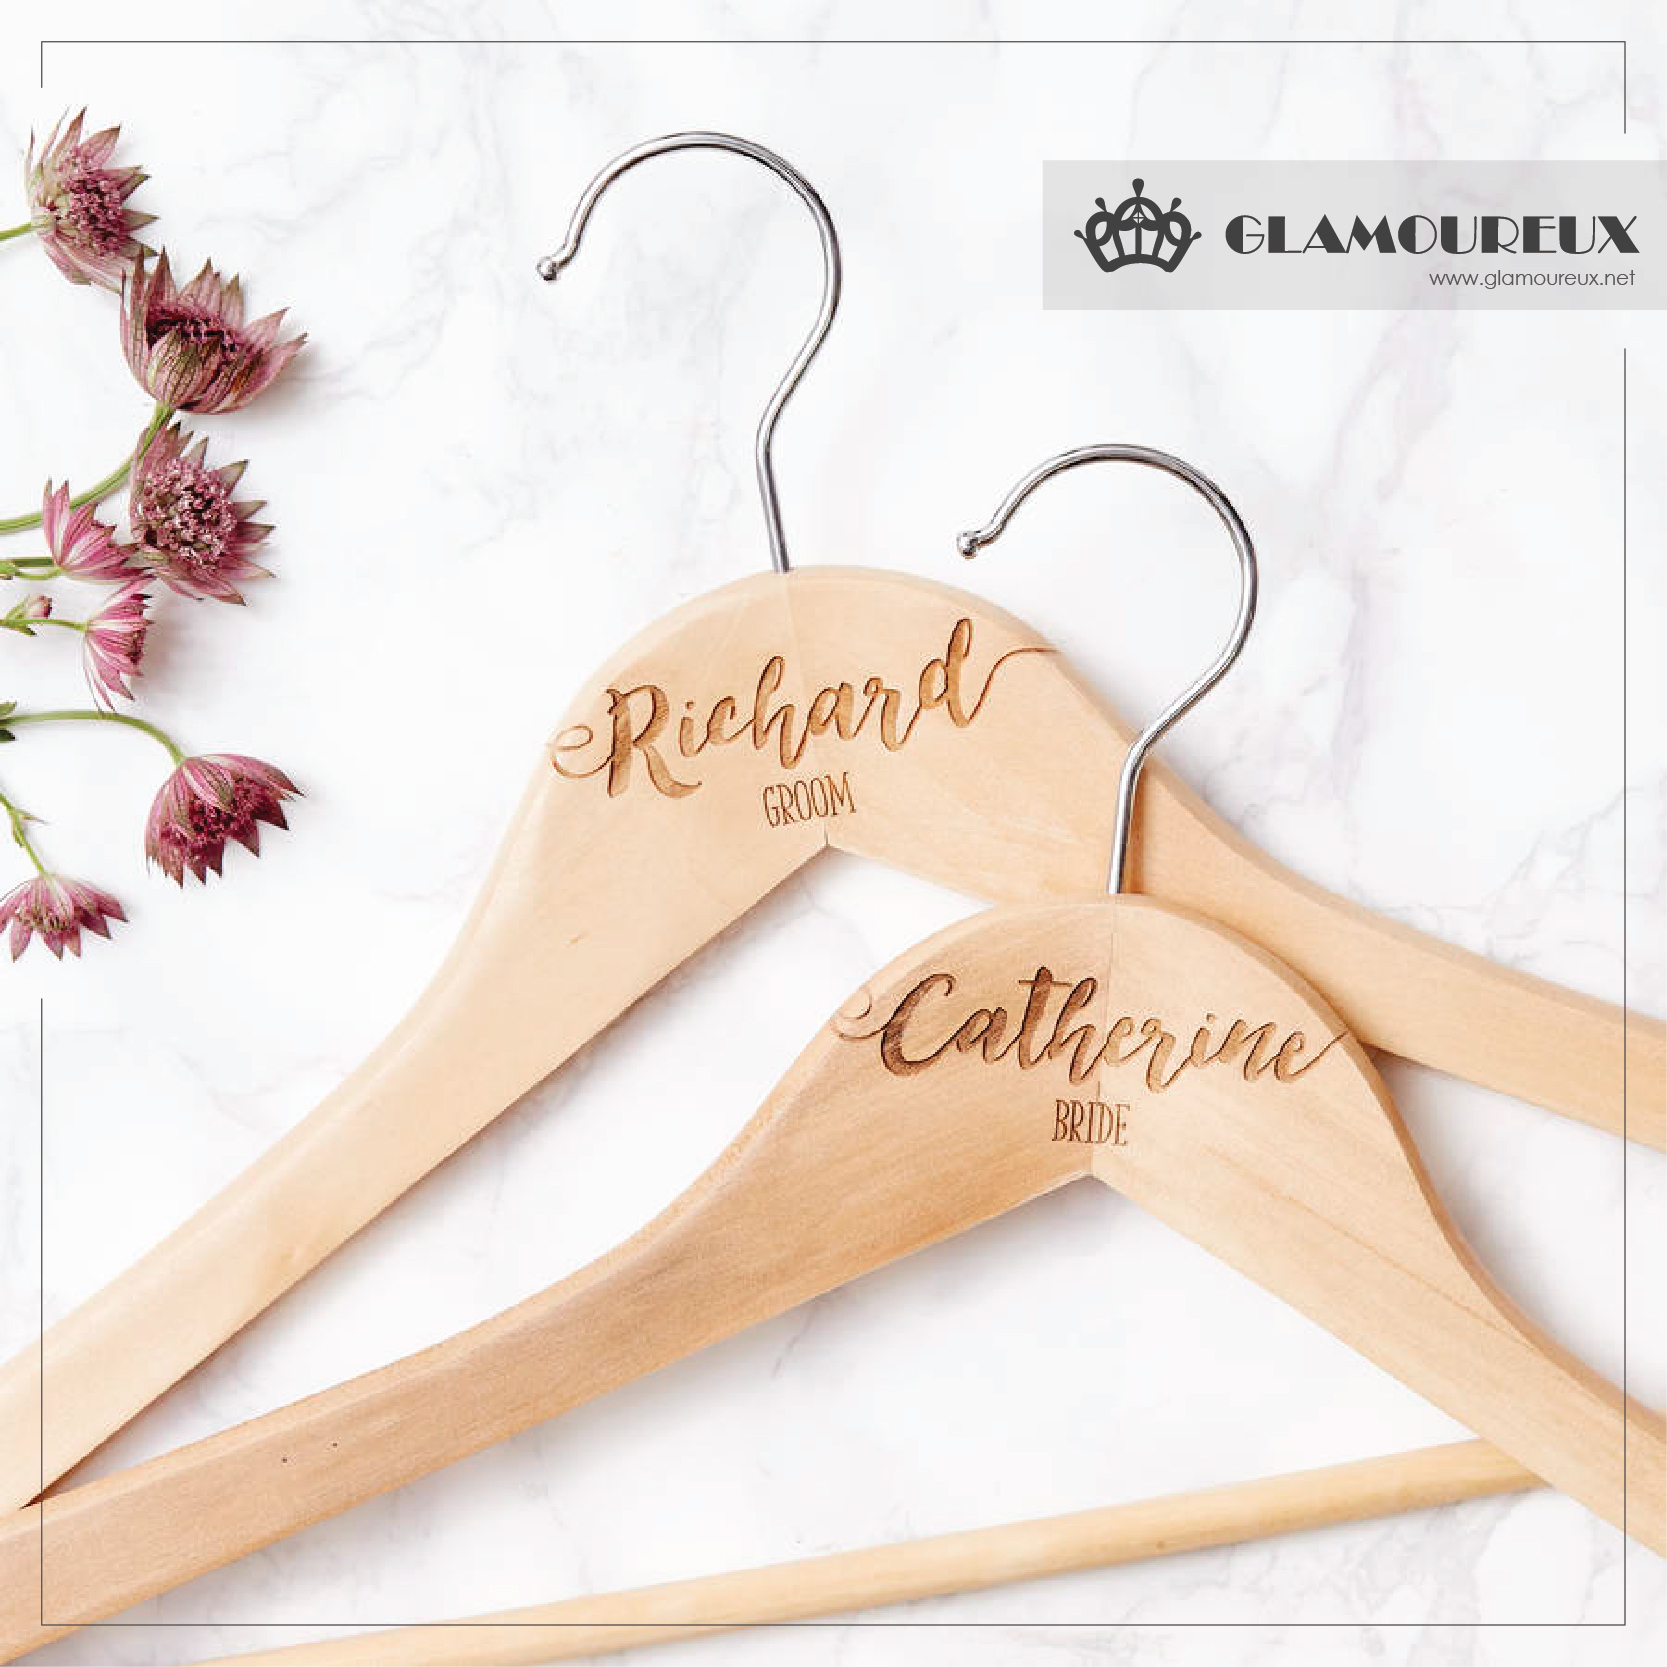 Customized Wedding Hangers 2 In A Set Glamoureux